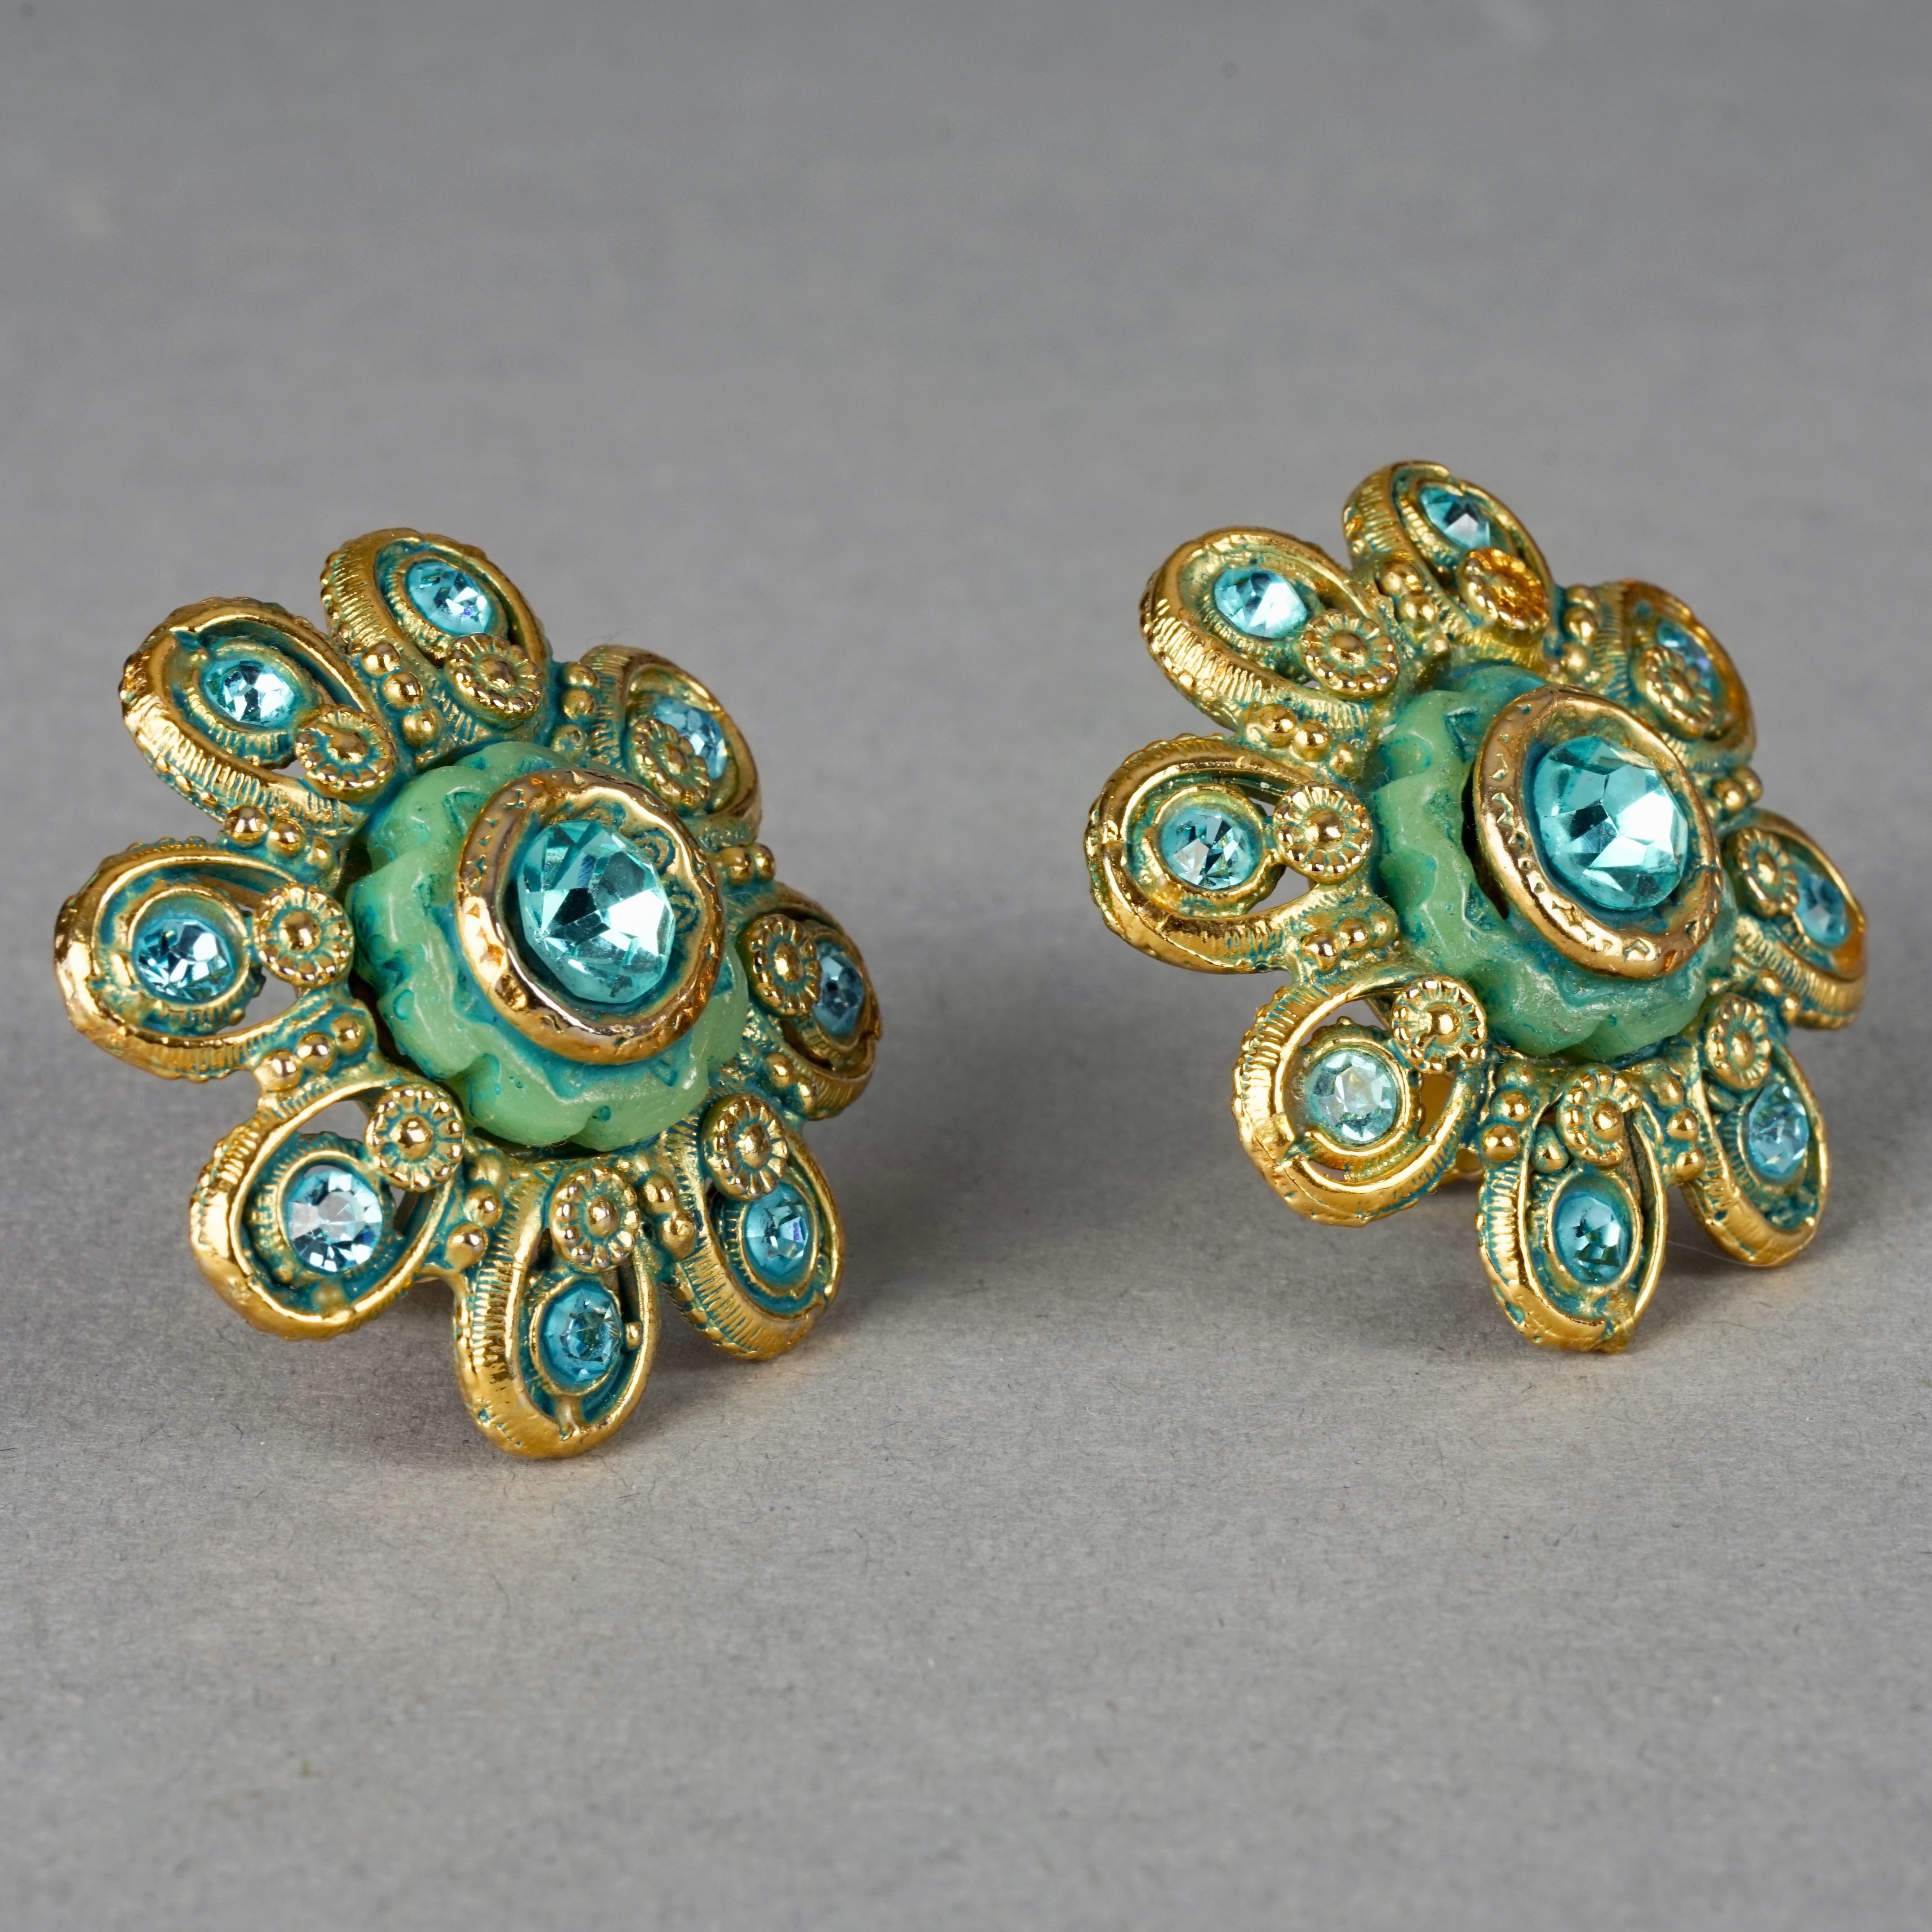 Vintage Massive KALINGER PARIS Blue Flower Resin with Rhinestones Earrings In Excellent Condition For Sale In Kingersheim, Alsace